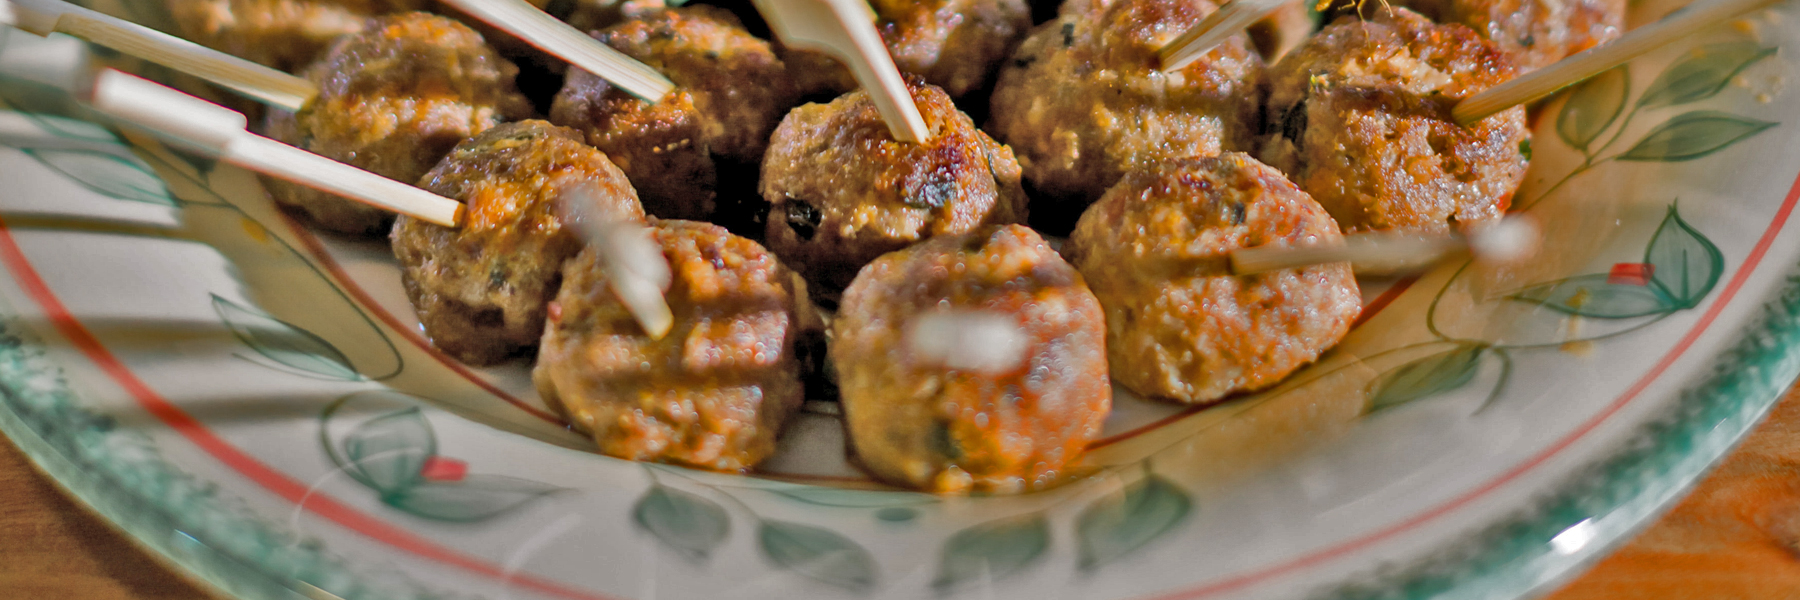 Wood roasted Italian meatballs for a catering event